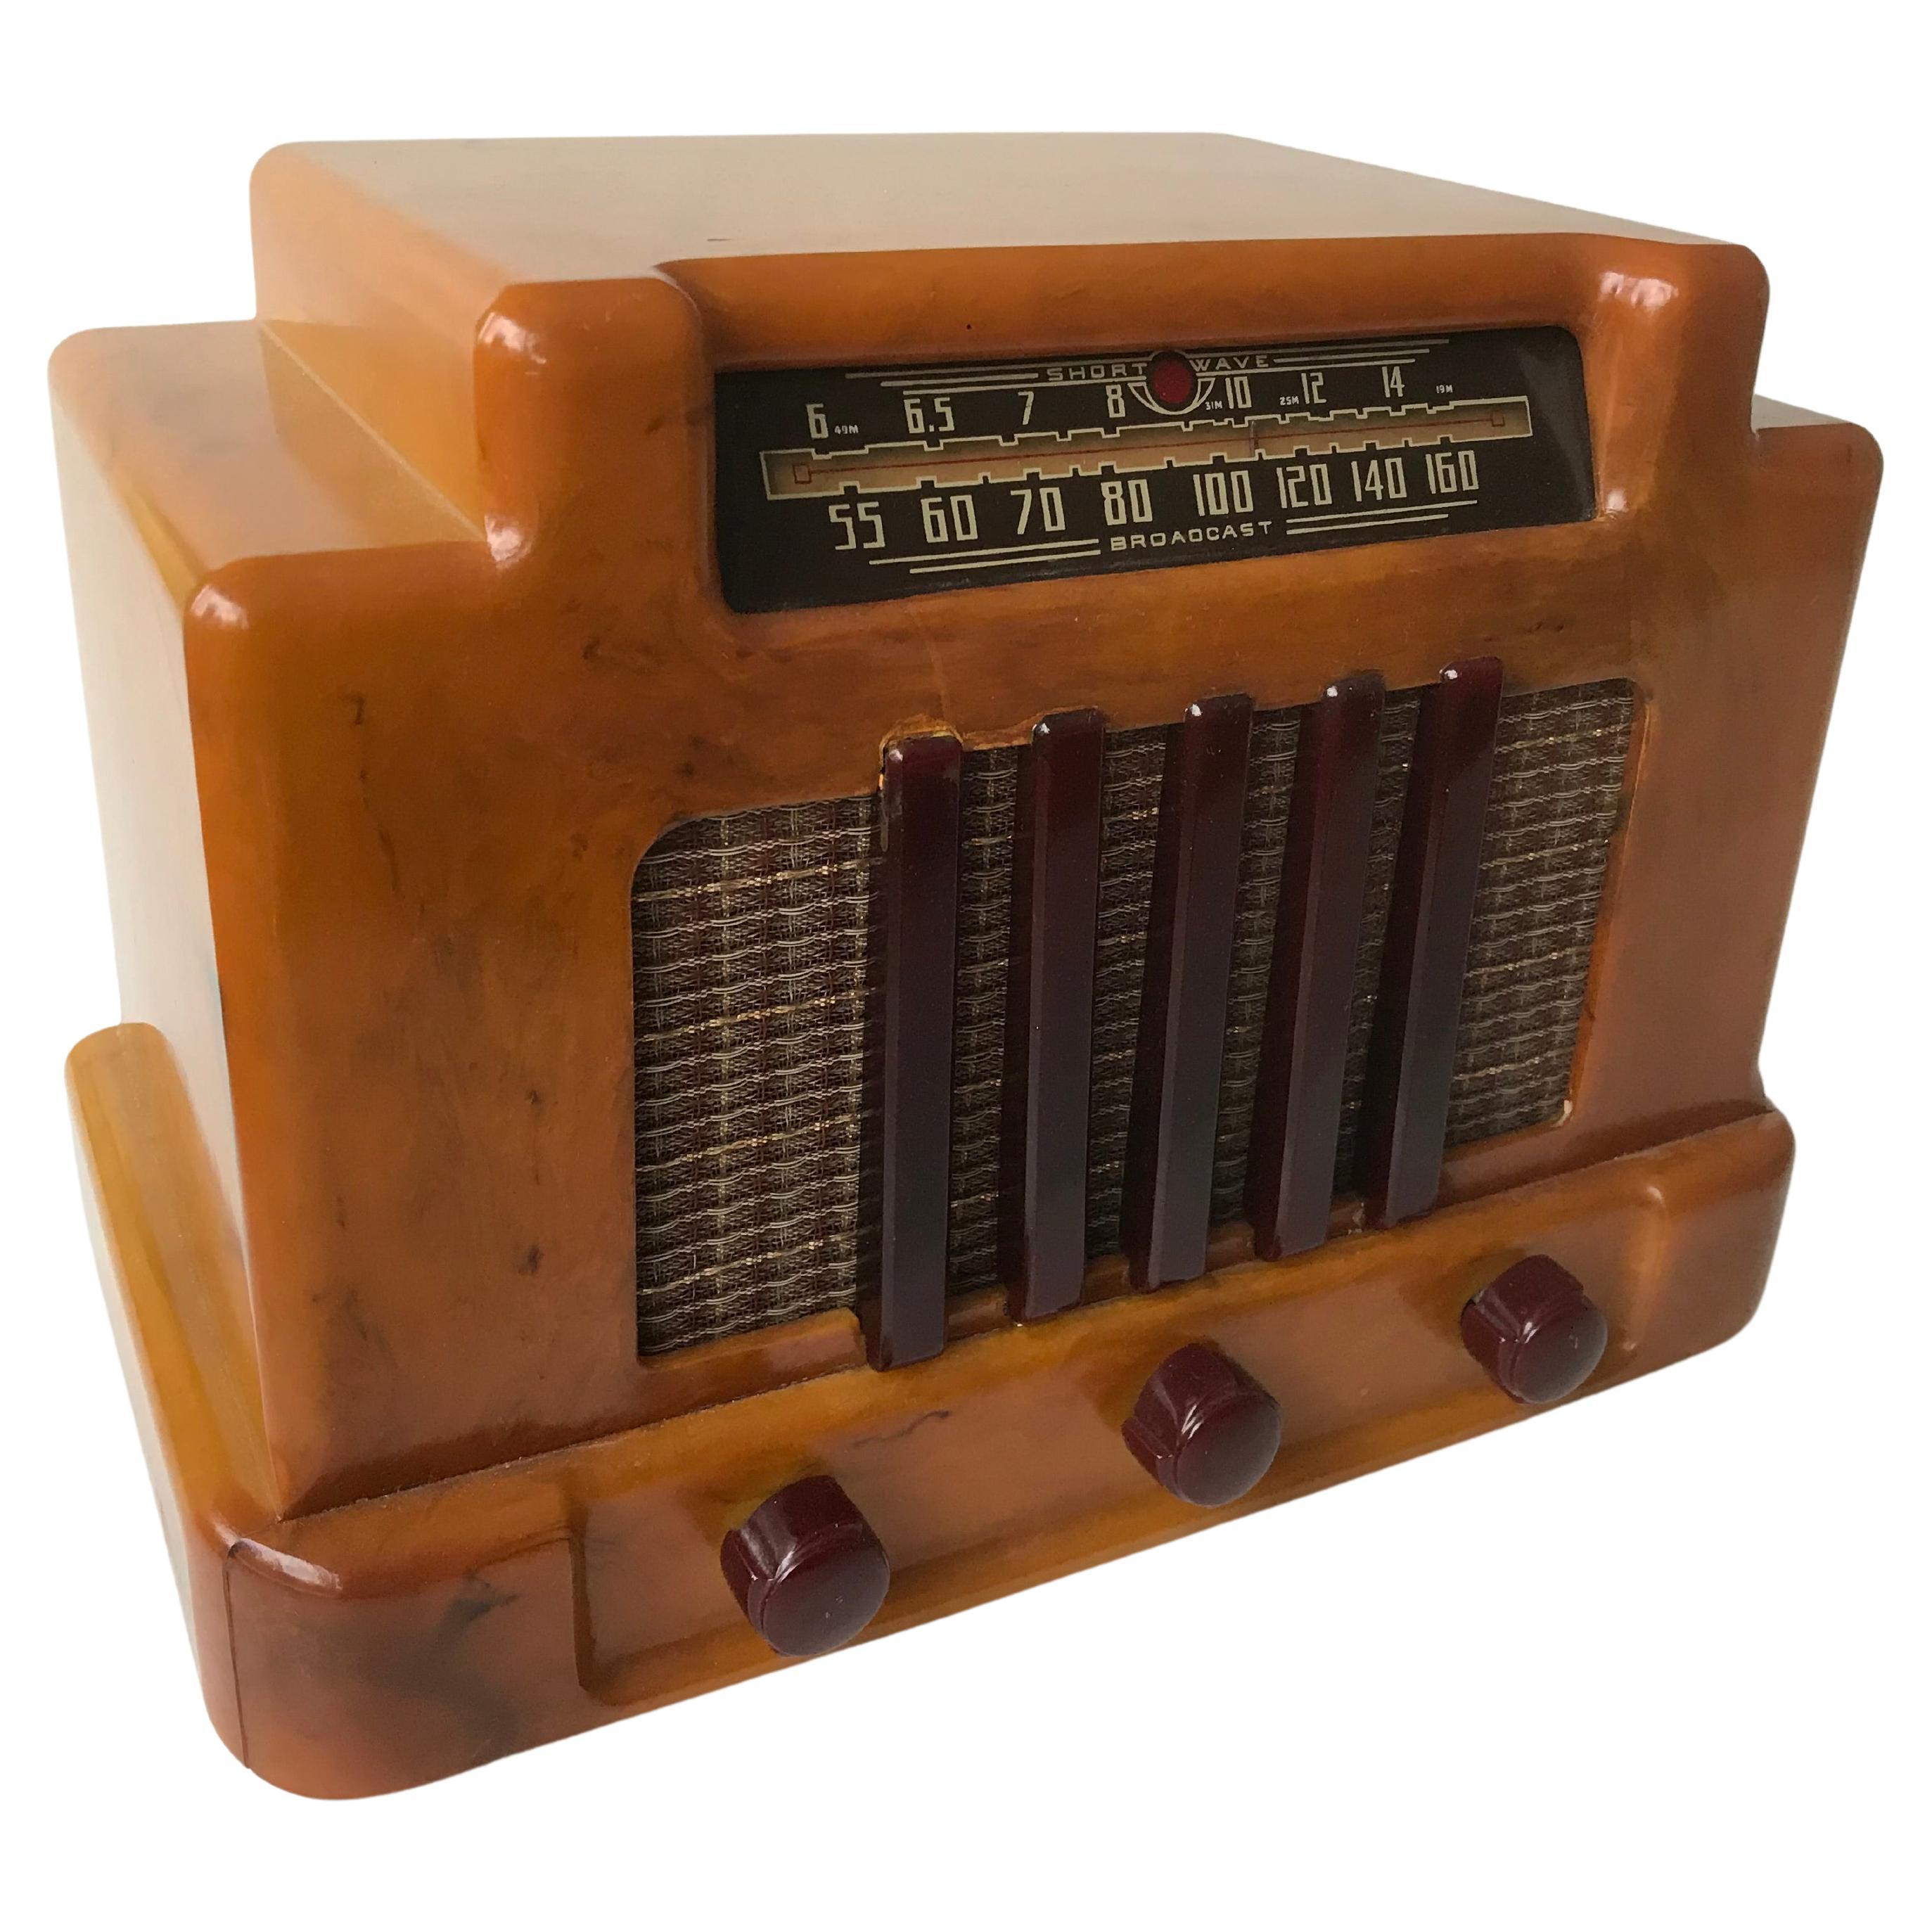 Addison Model 5 Butterscotch and Maroon Catalin Tube Radio, 1940 For Sale